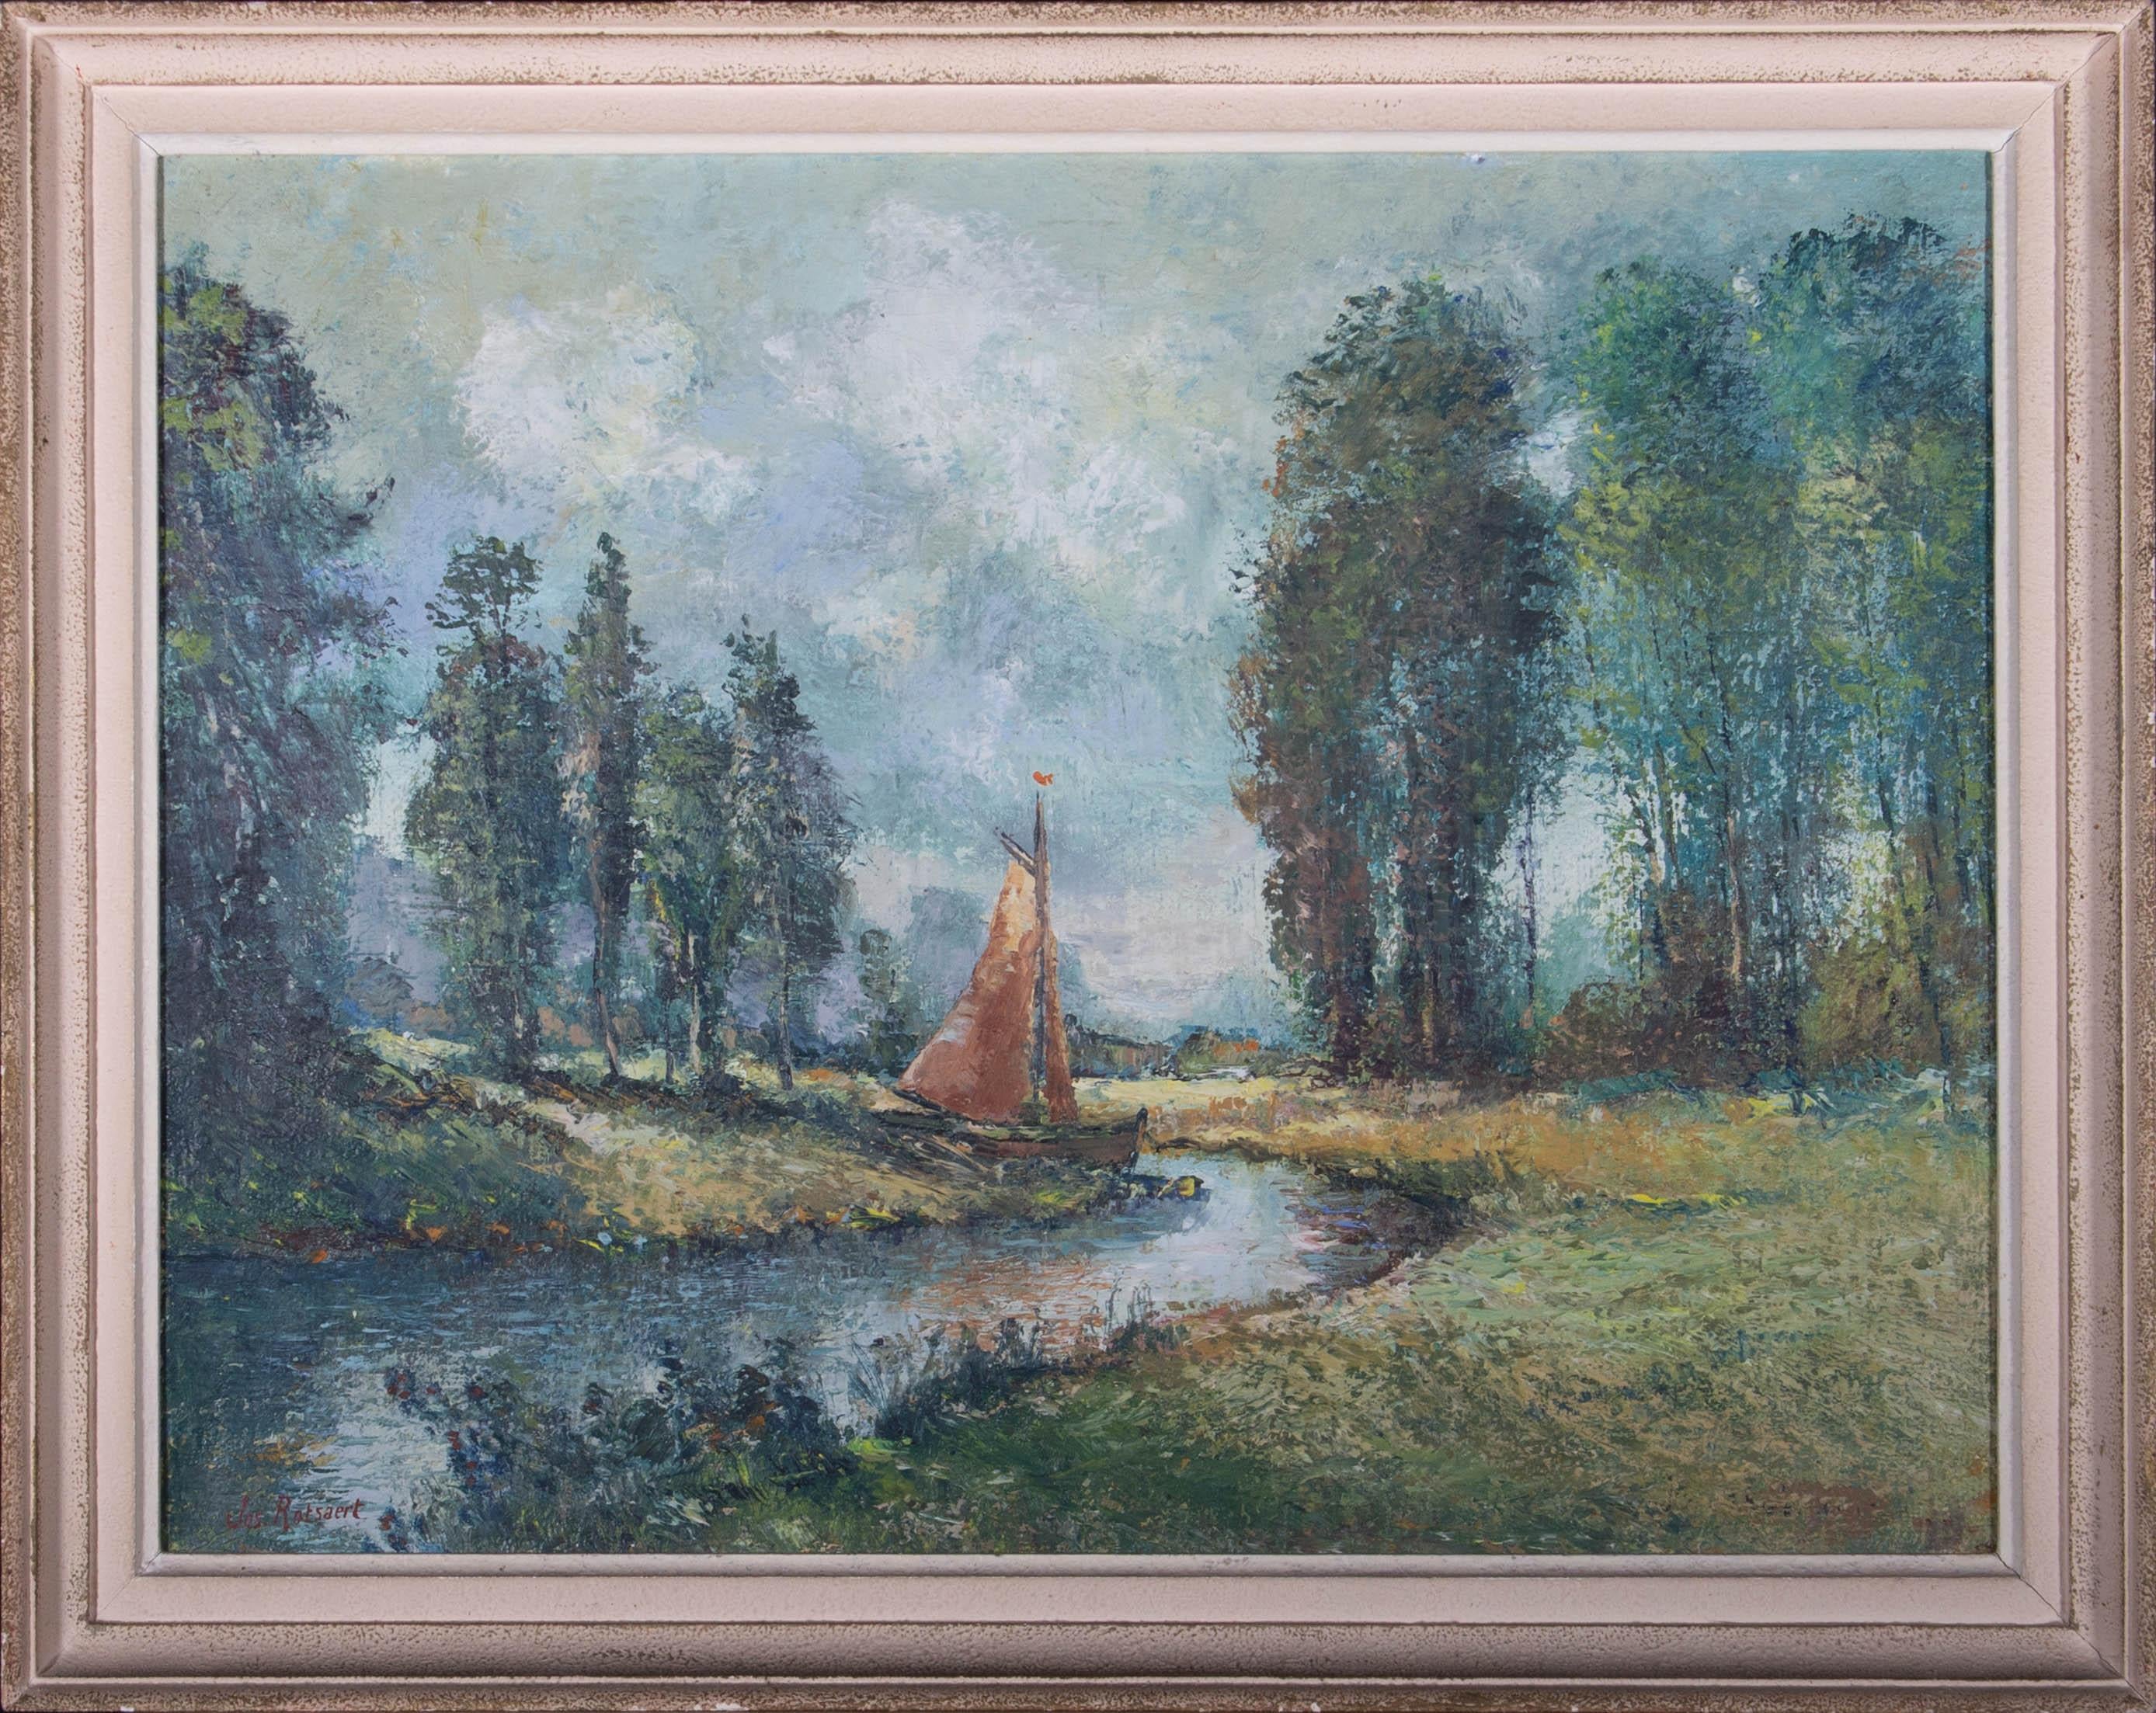 A landscape depicting a winding river with a sailing boat beached on the left bank, rendered with an impressionistic application of paint. Presented in a textured and distressed gold and cream painted frame. The artist has painted over their